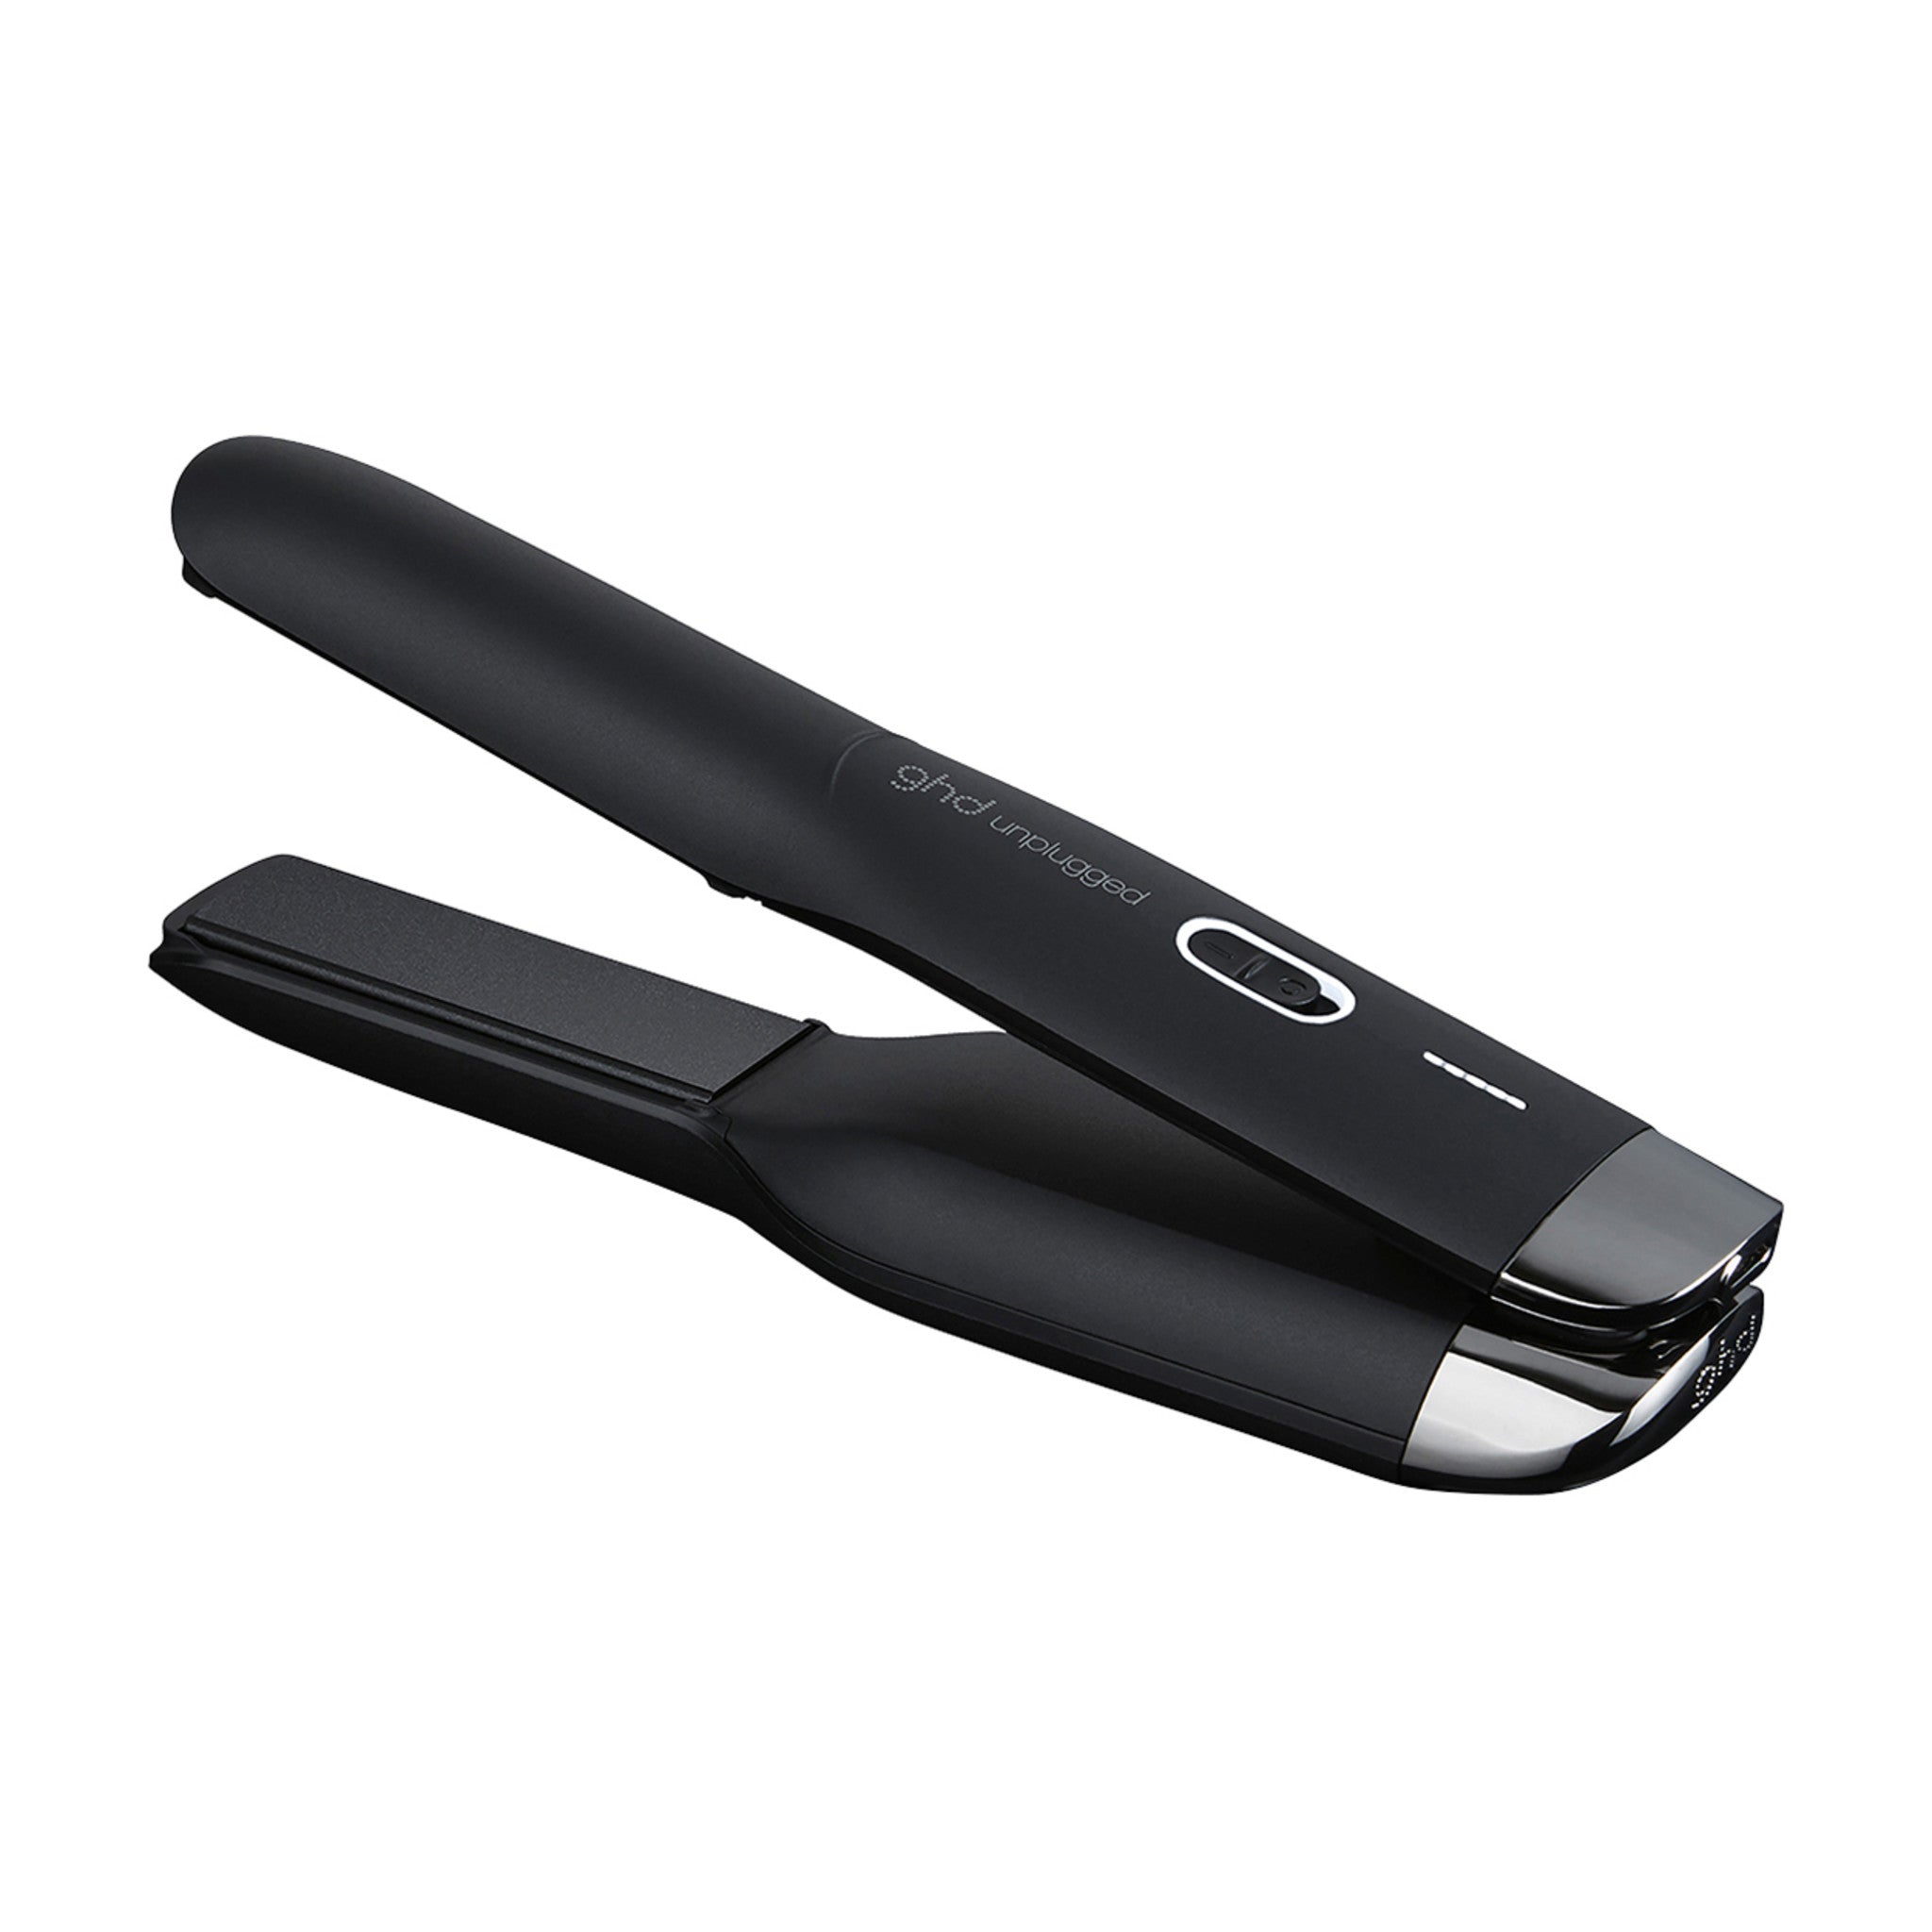 GHD Unplugged Styler Color/Shade variant: Black